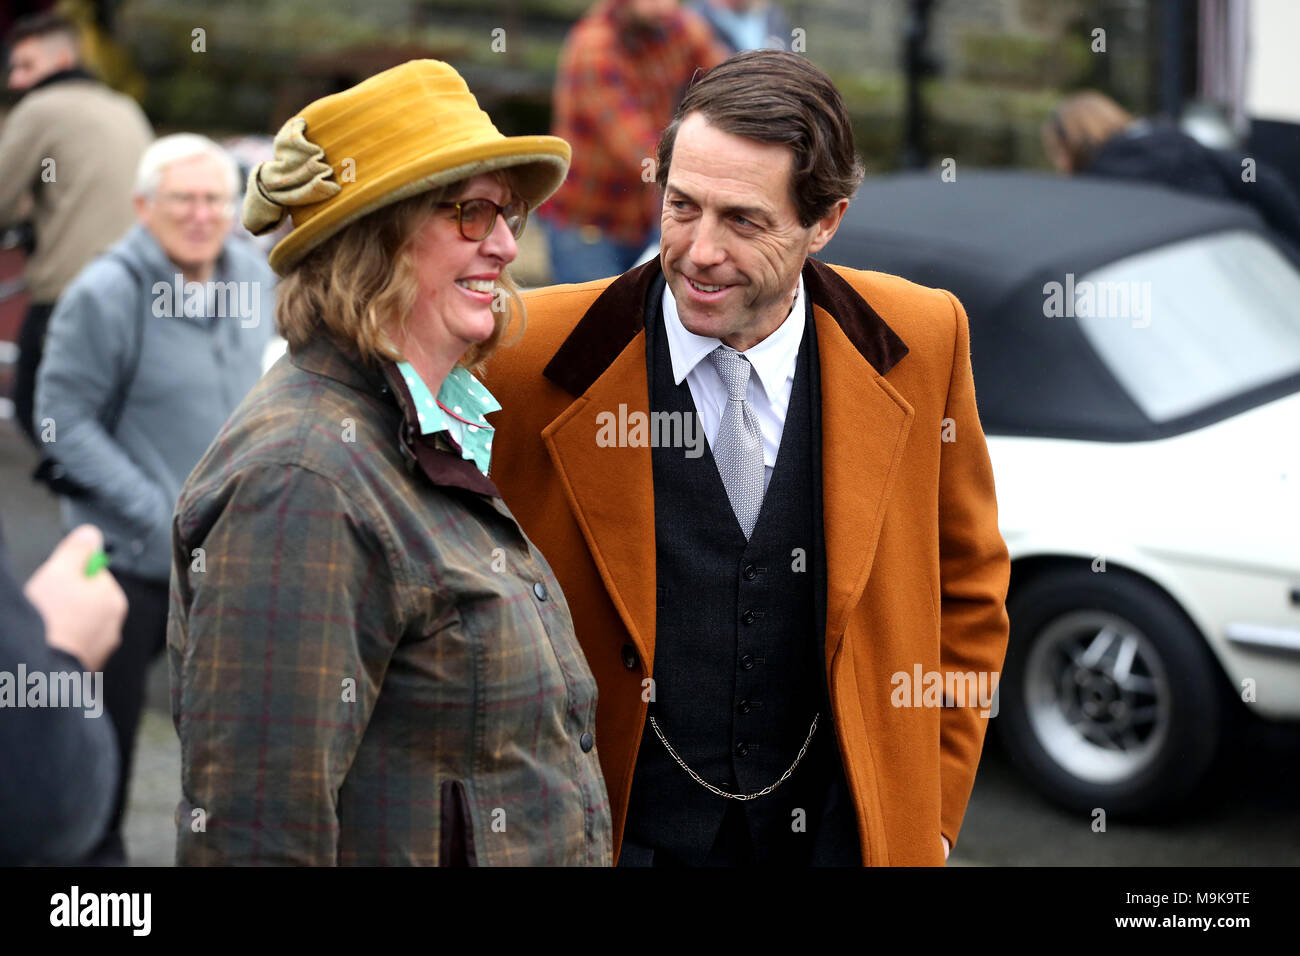 Hugh Grant filming 'A Very English Scandal' based on the life of the politician Jeremy Thorpe MP. Filming took place in the quaint Devon village of Ch Stock Photo